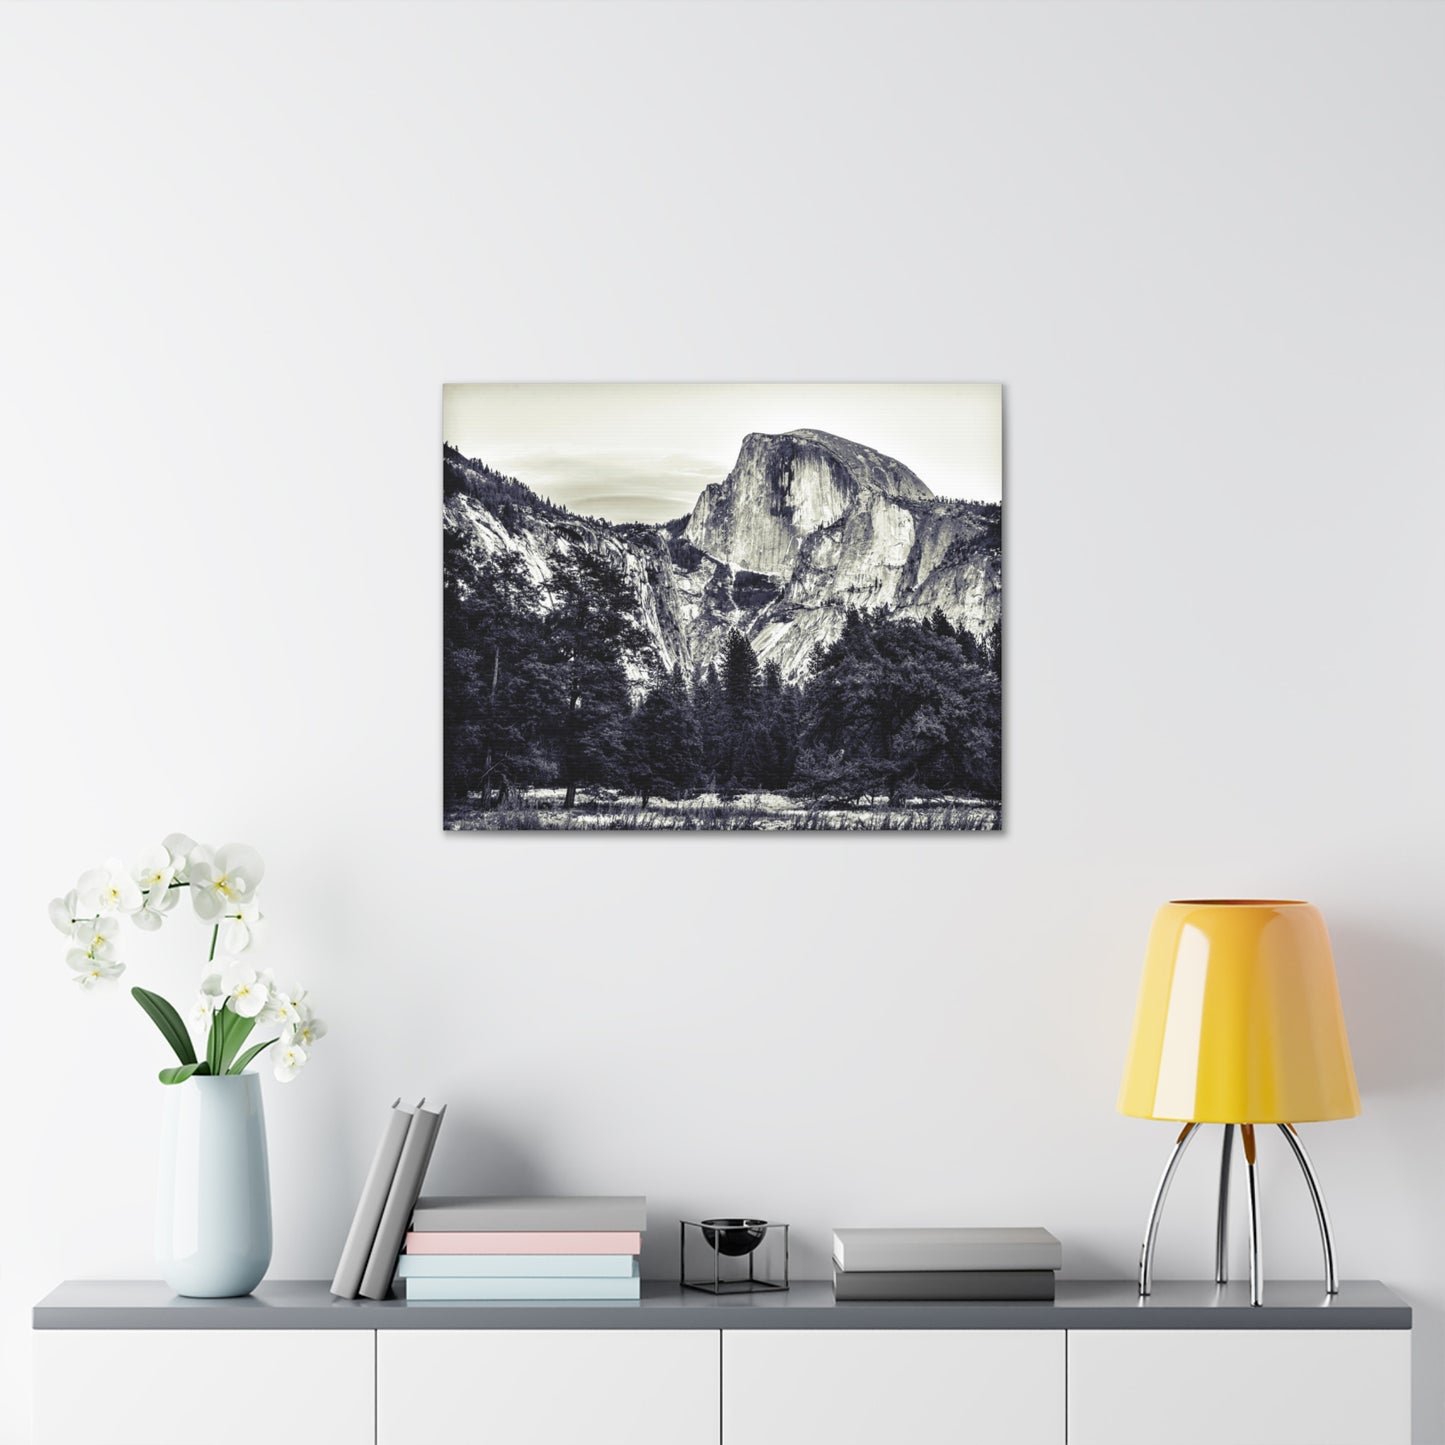 Canvas Print Of Half Dome In Yosemite For Wall Art